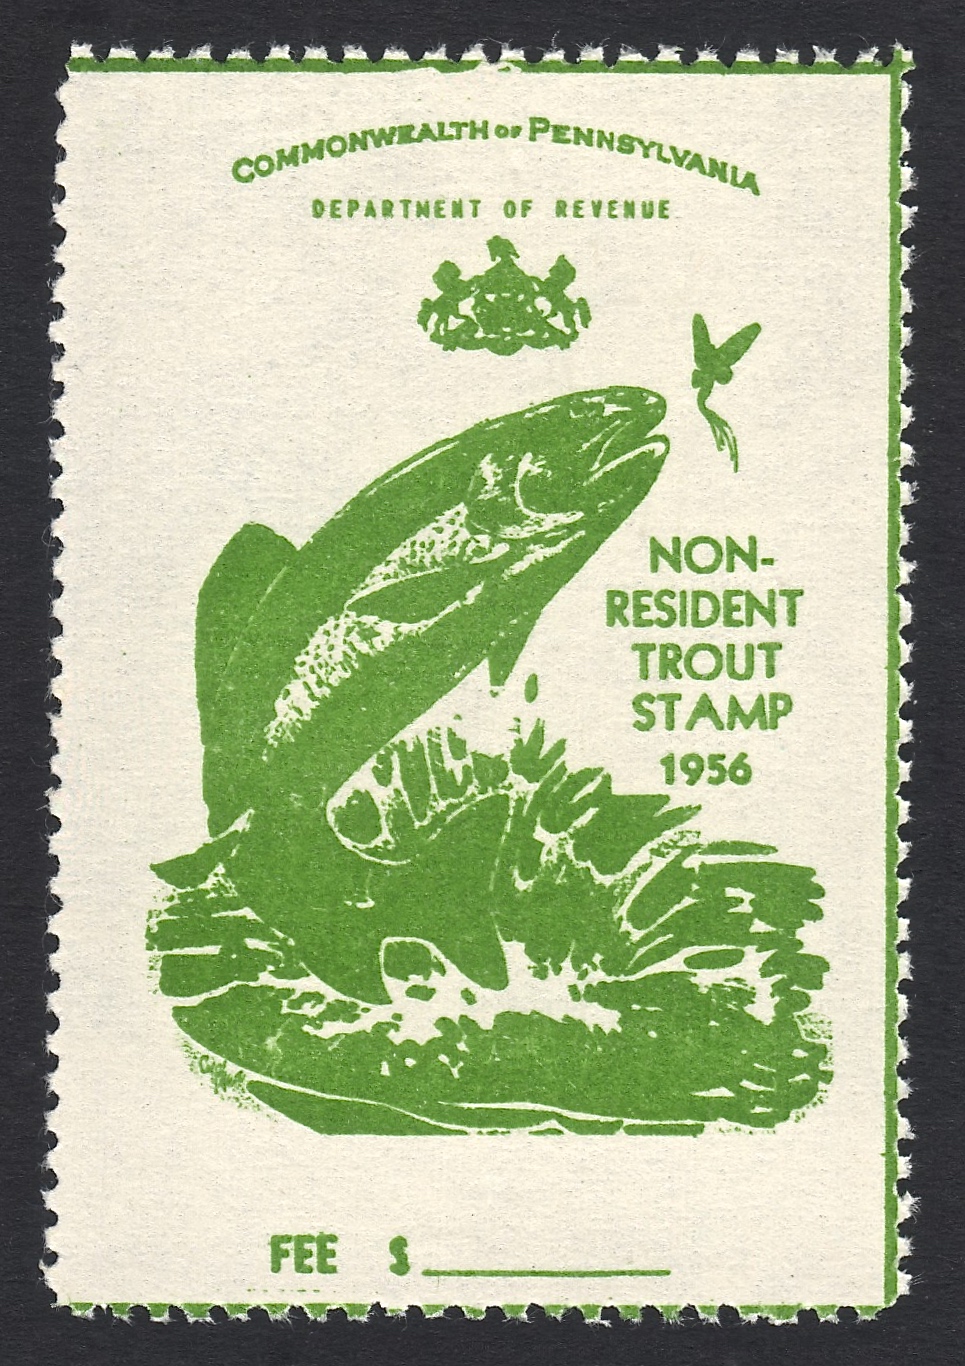 1956 Pennsylvania NR Trout without written fee